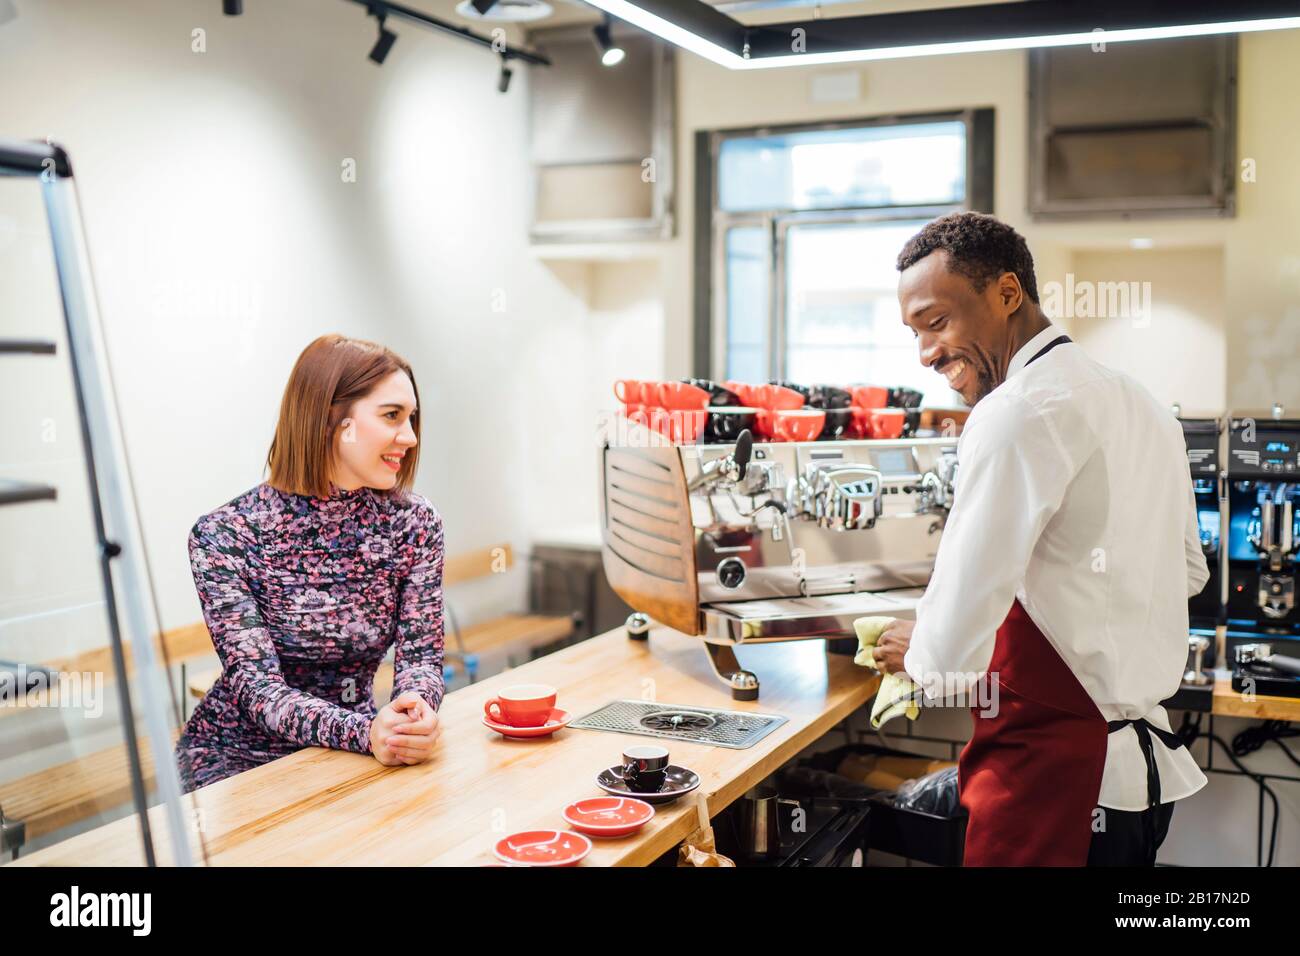 Woman at the counter in a cafe placing the order Stock Photo